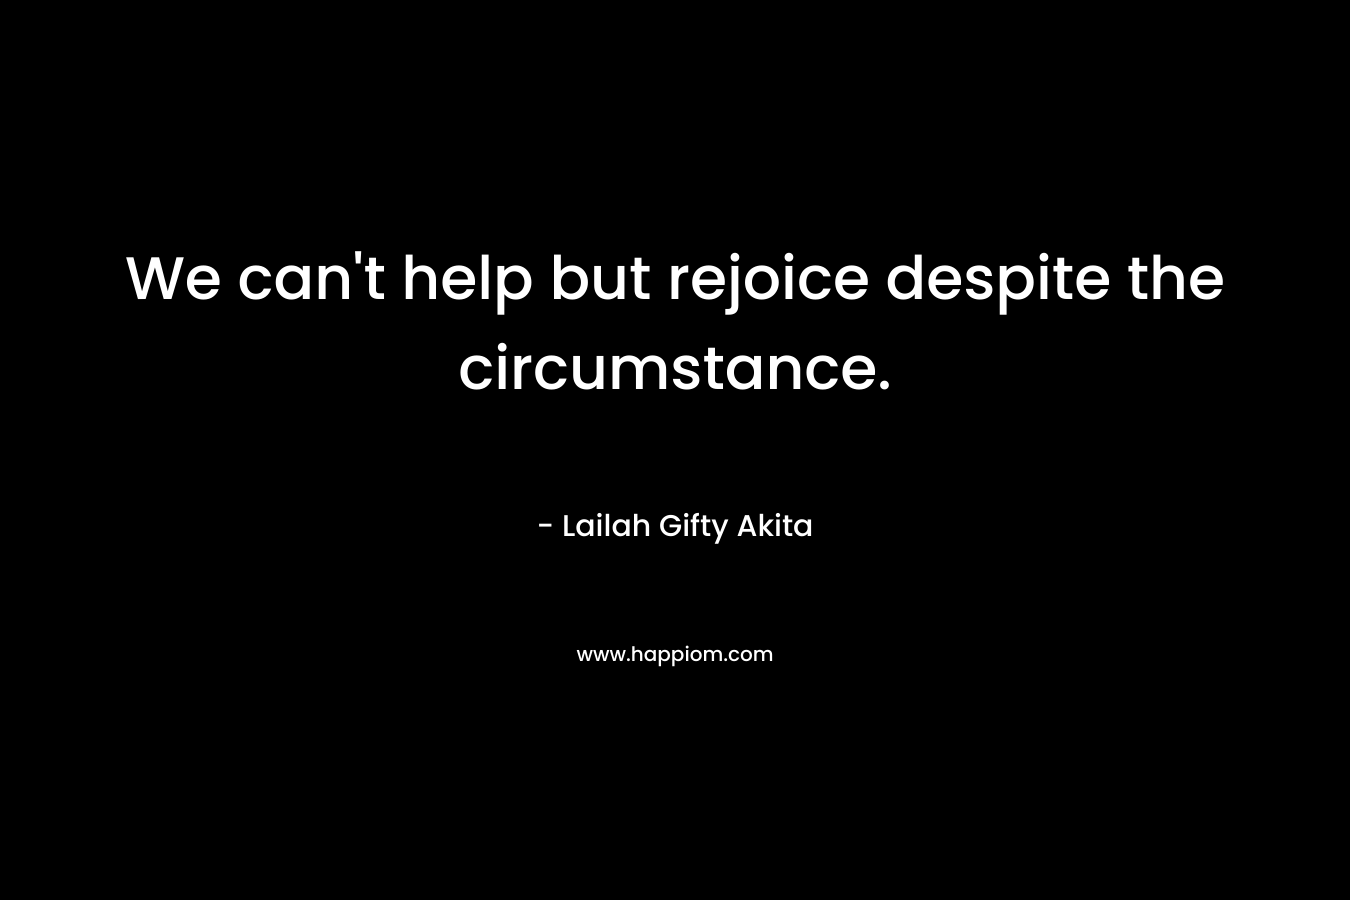 We can’t help but rejoice despite the circumstance. – Lailah Gifty Akita